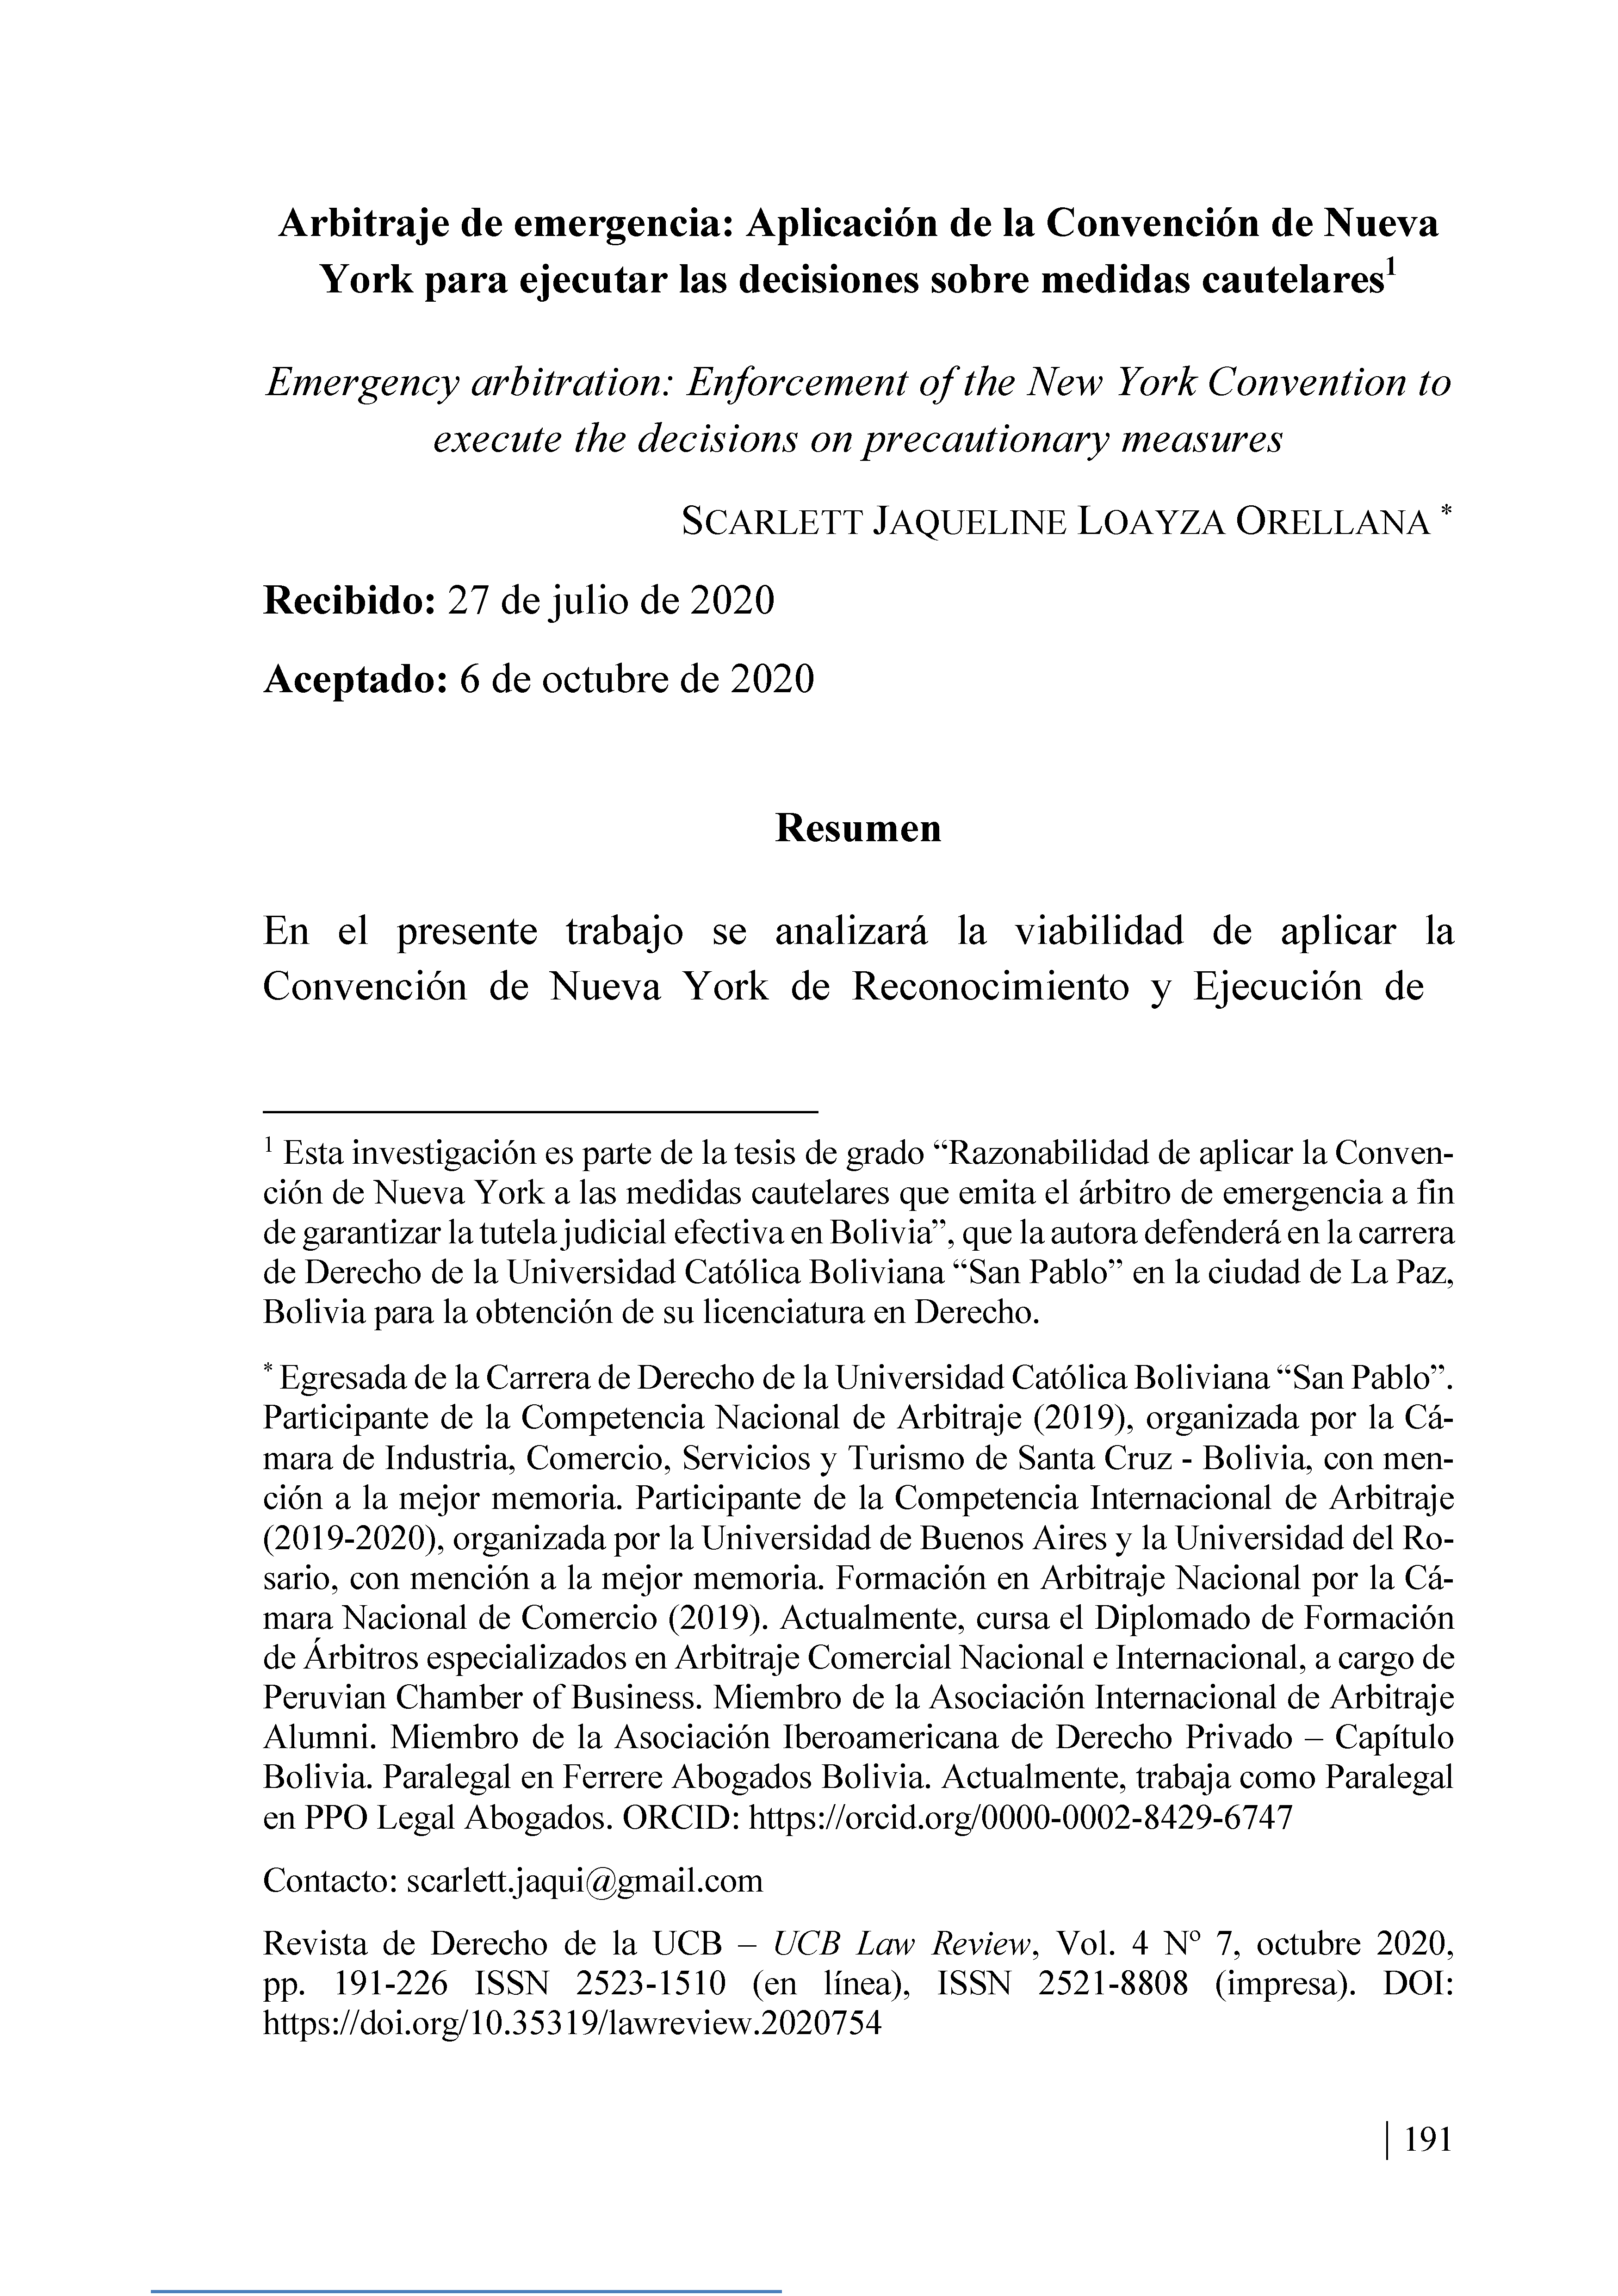 Emergency arbitration: Enforcement of the New York Convention to execute the decisions on precautionary measures